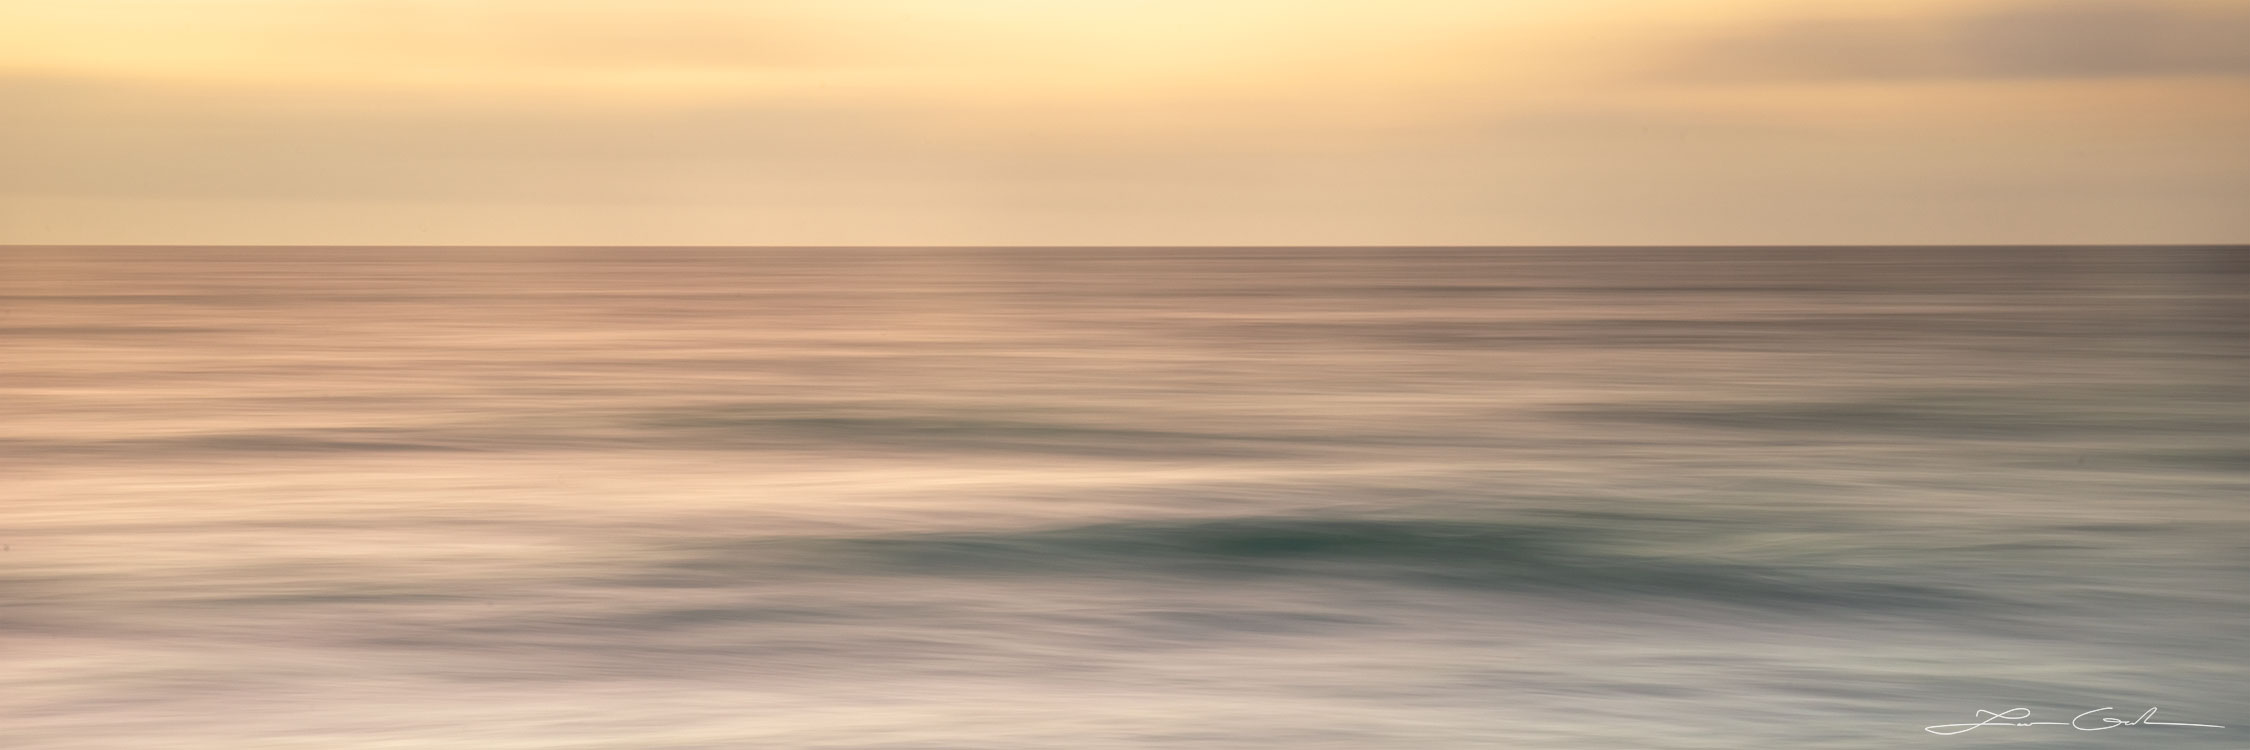 A soft water panoramic seascape during sunrise - abstract photo - Gintchin Fine Art